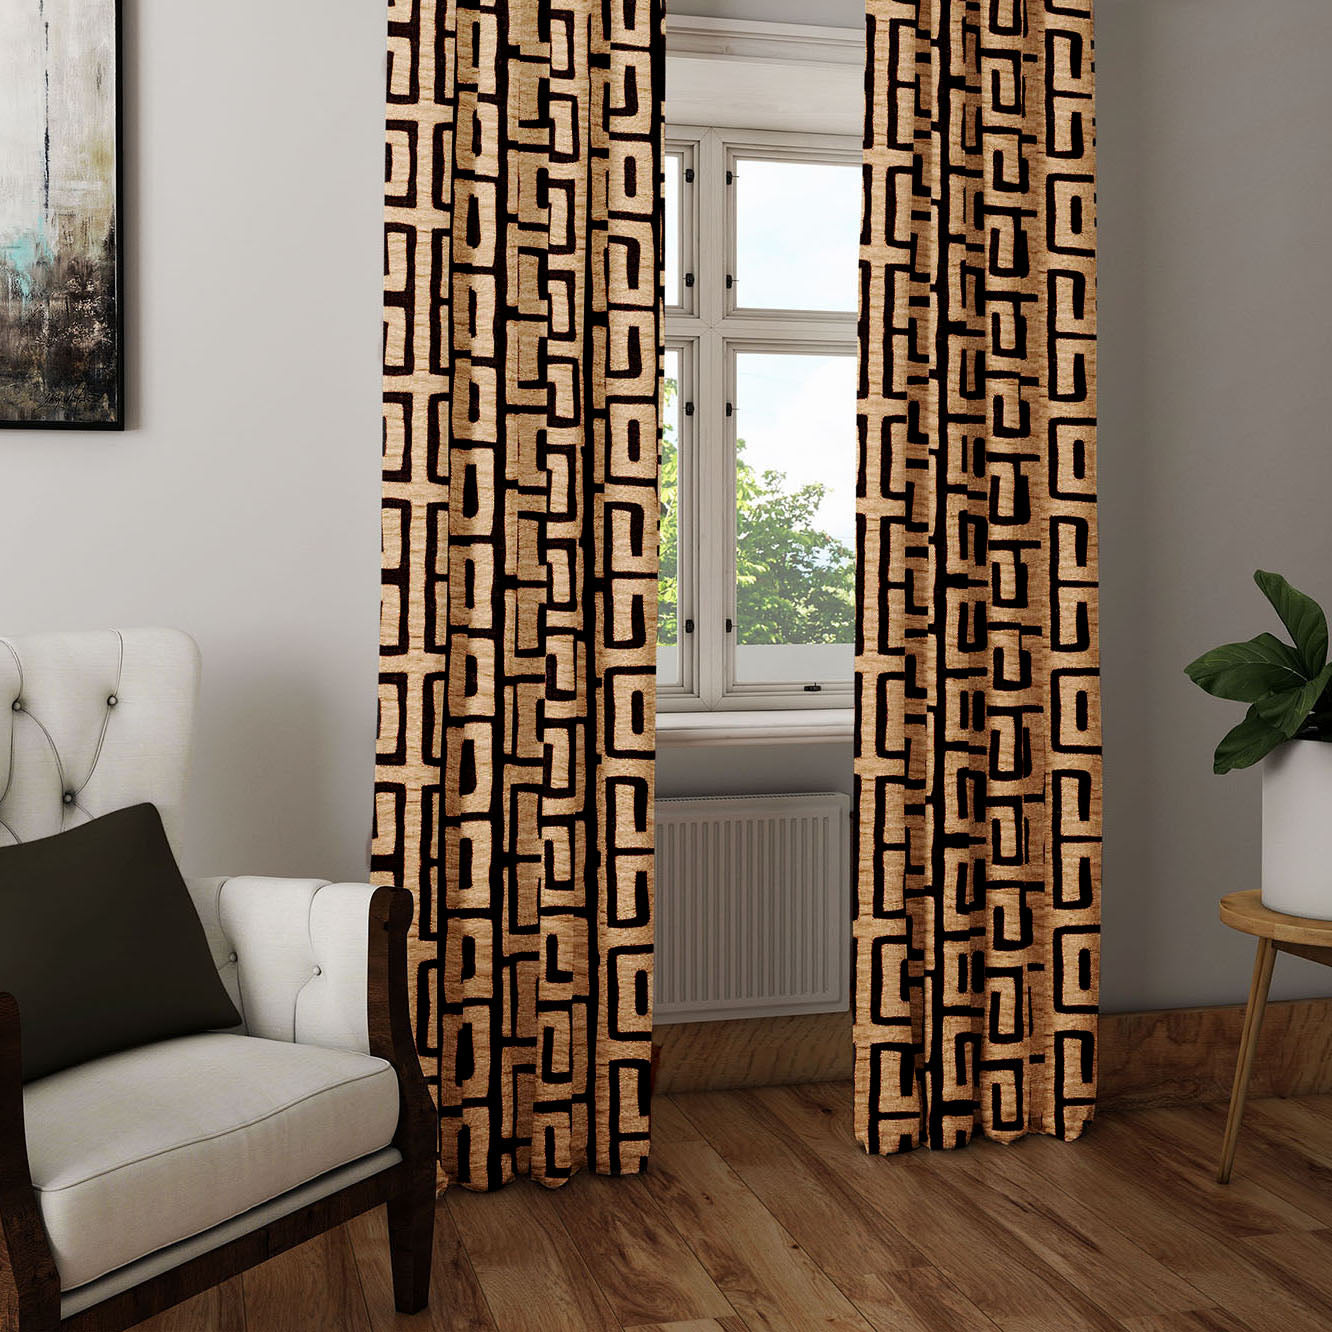 Afro Boho Curtains with Blackout in Traditional Kuba Cloth Design - Tan